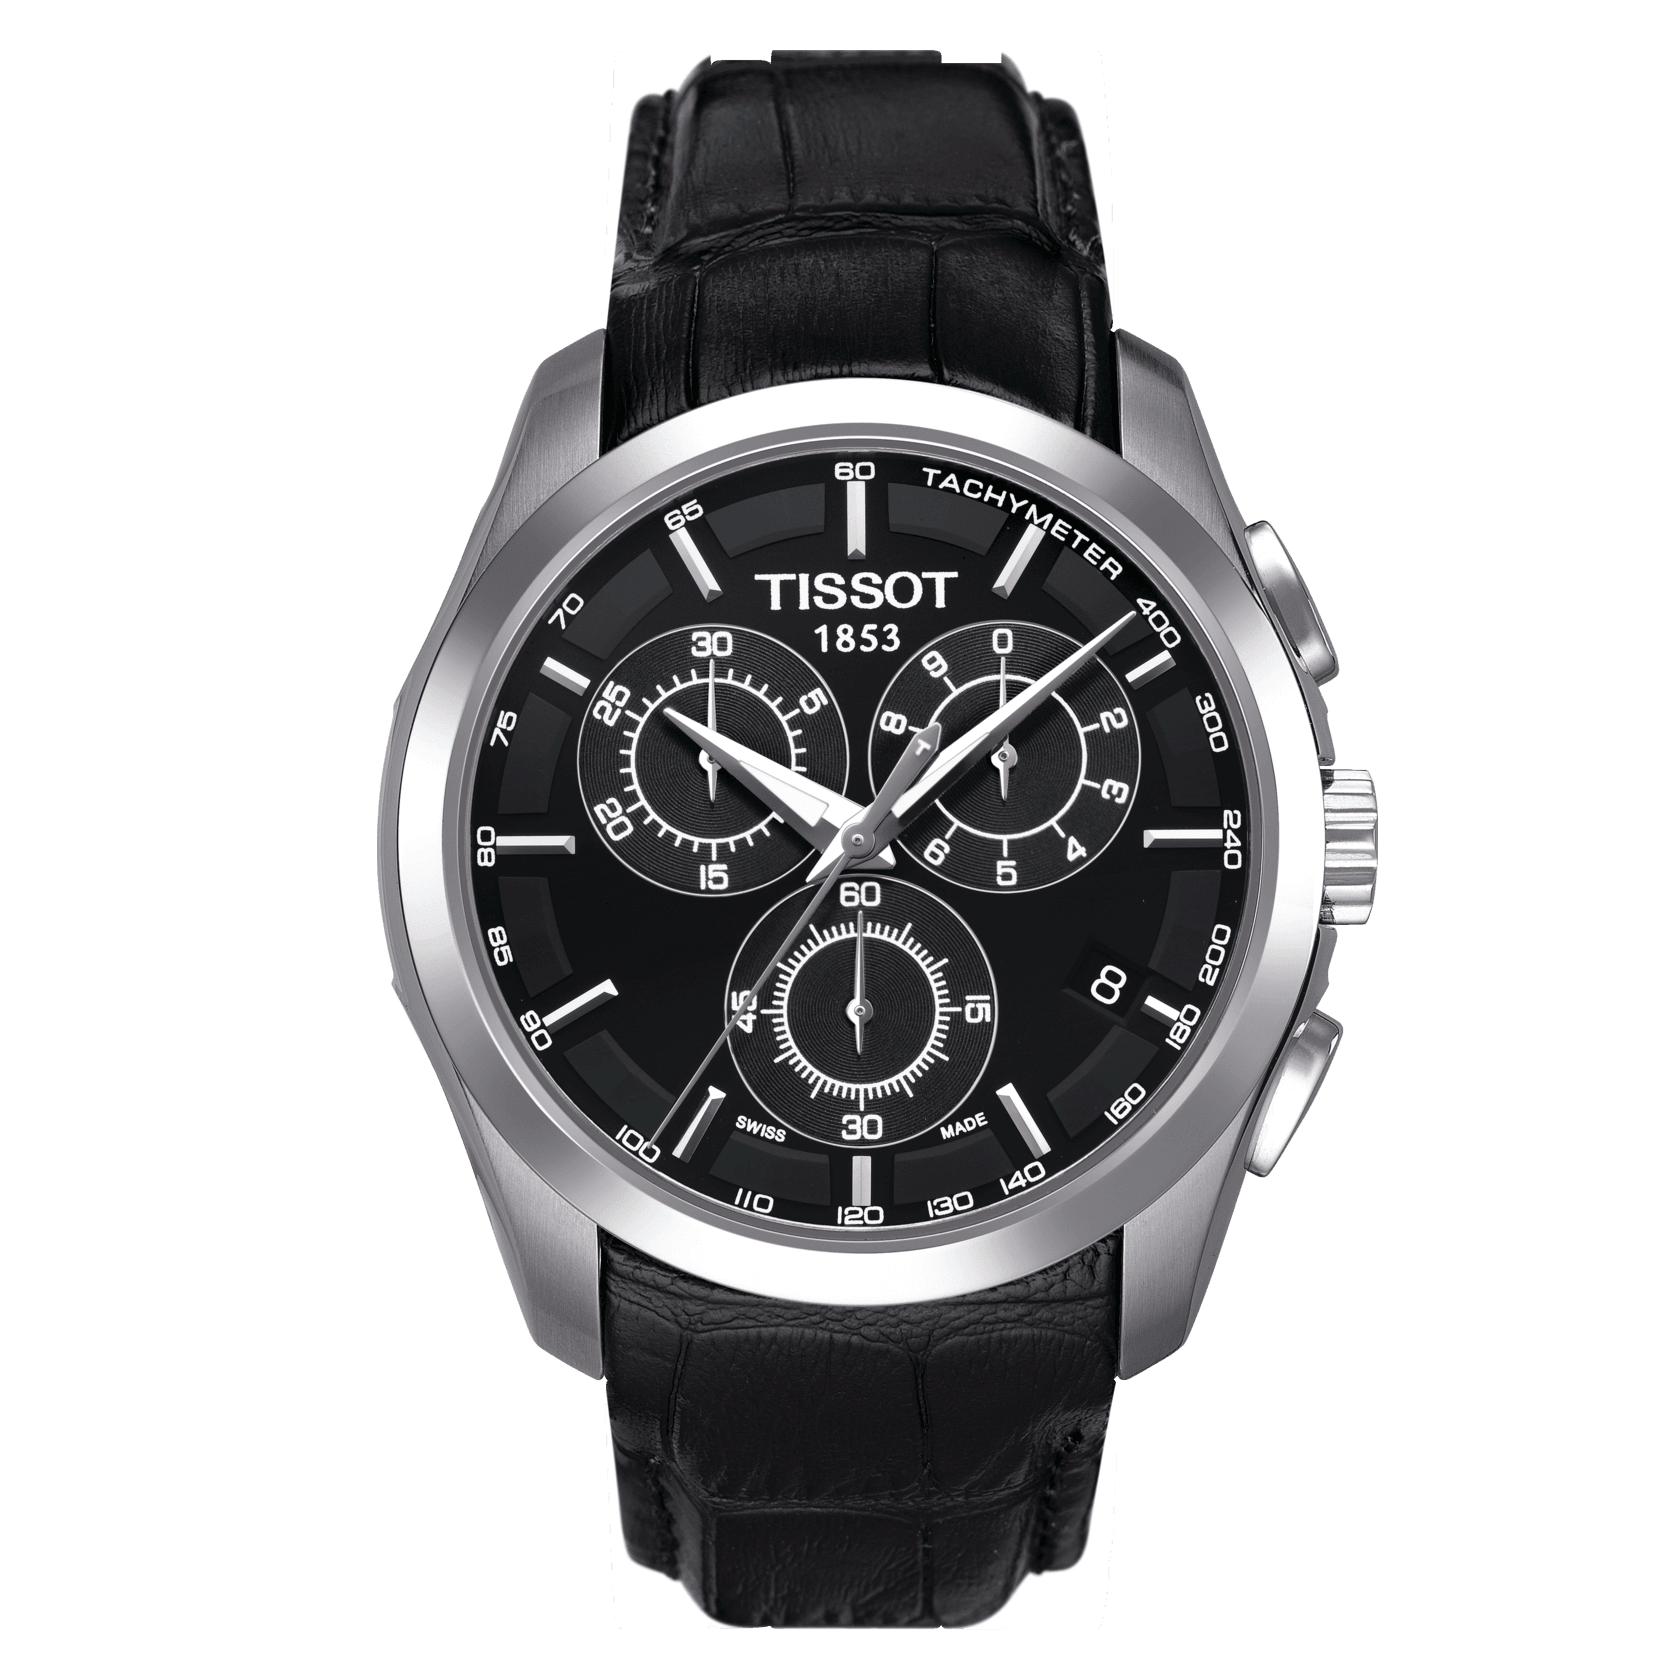 Tissot T-Trend Couturier Black Dial Chronograph Men's Watch - Kamal Watch Company